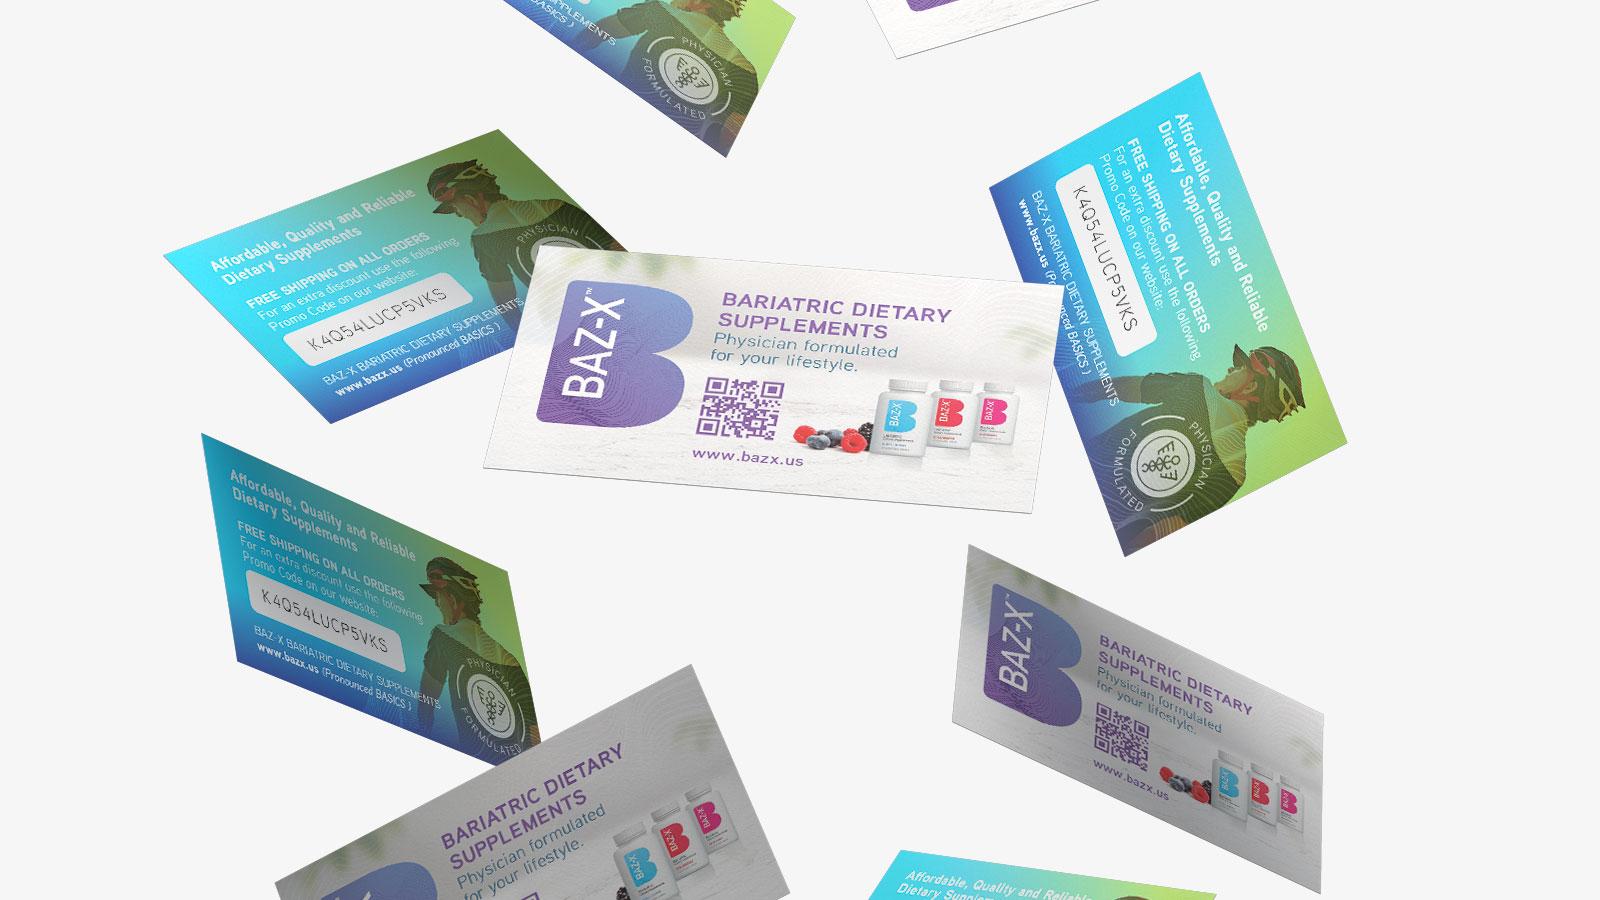 BAZ-X Bariatric Supplements | Promotional Cards